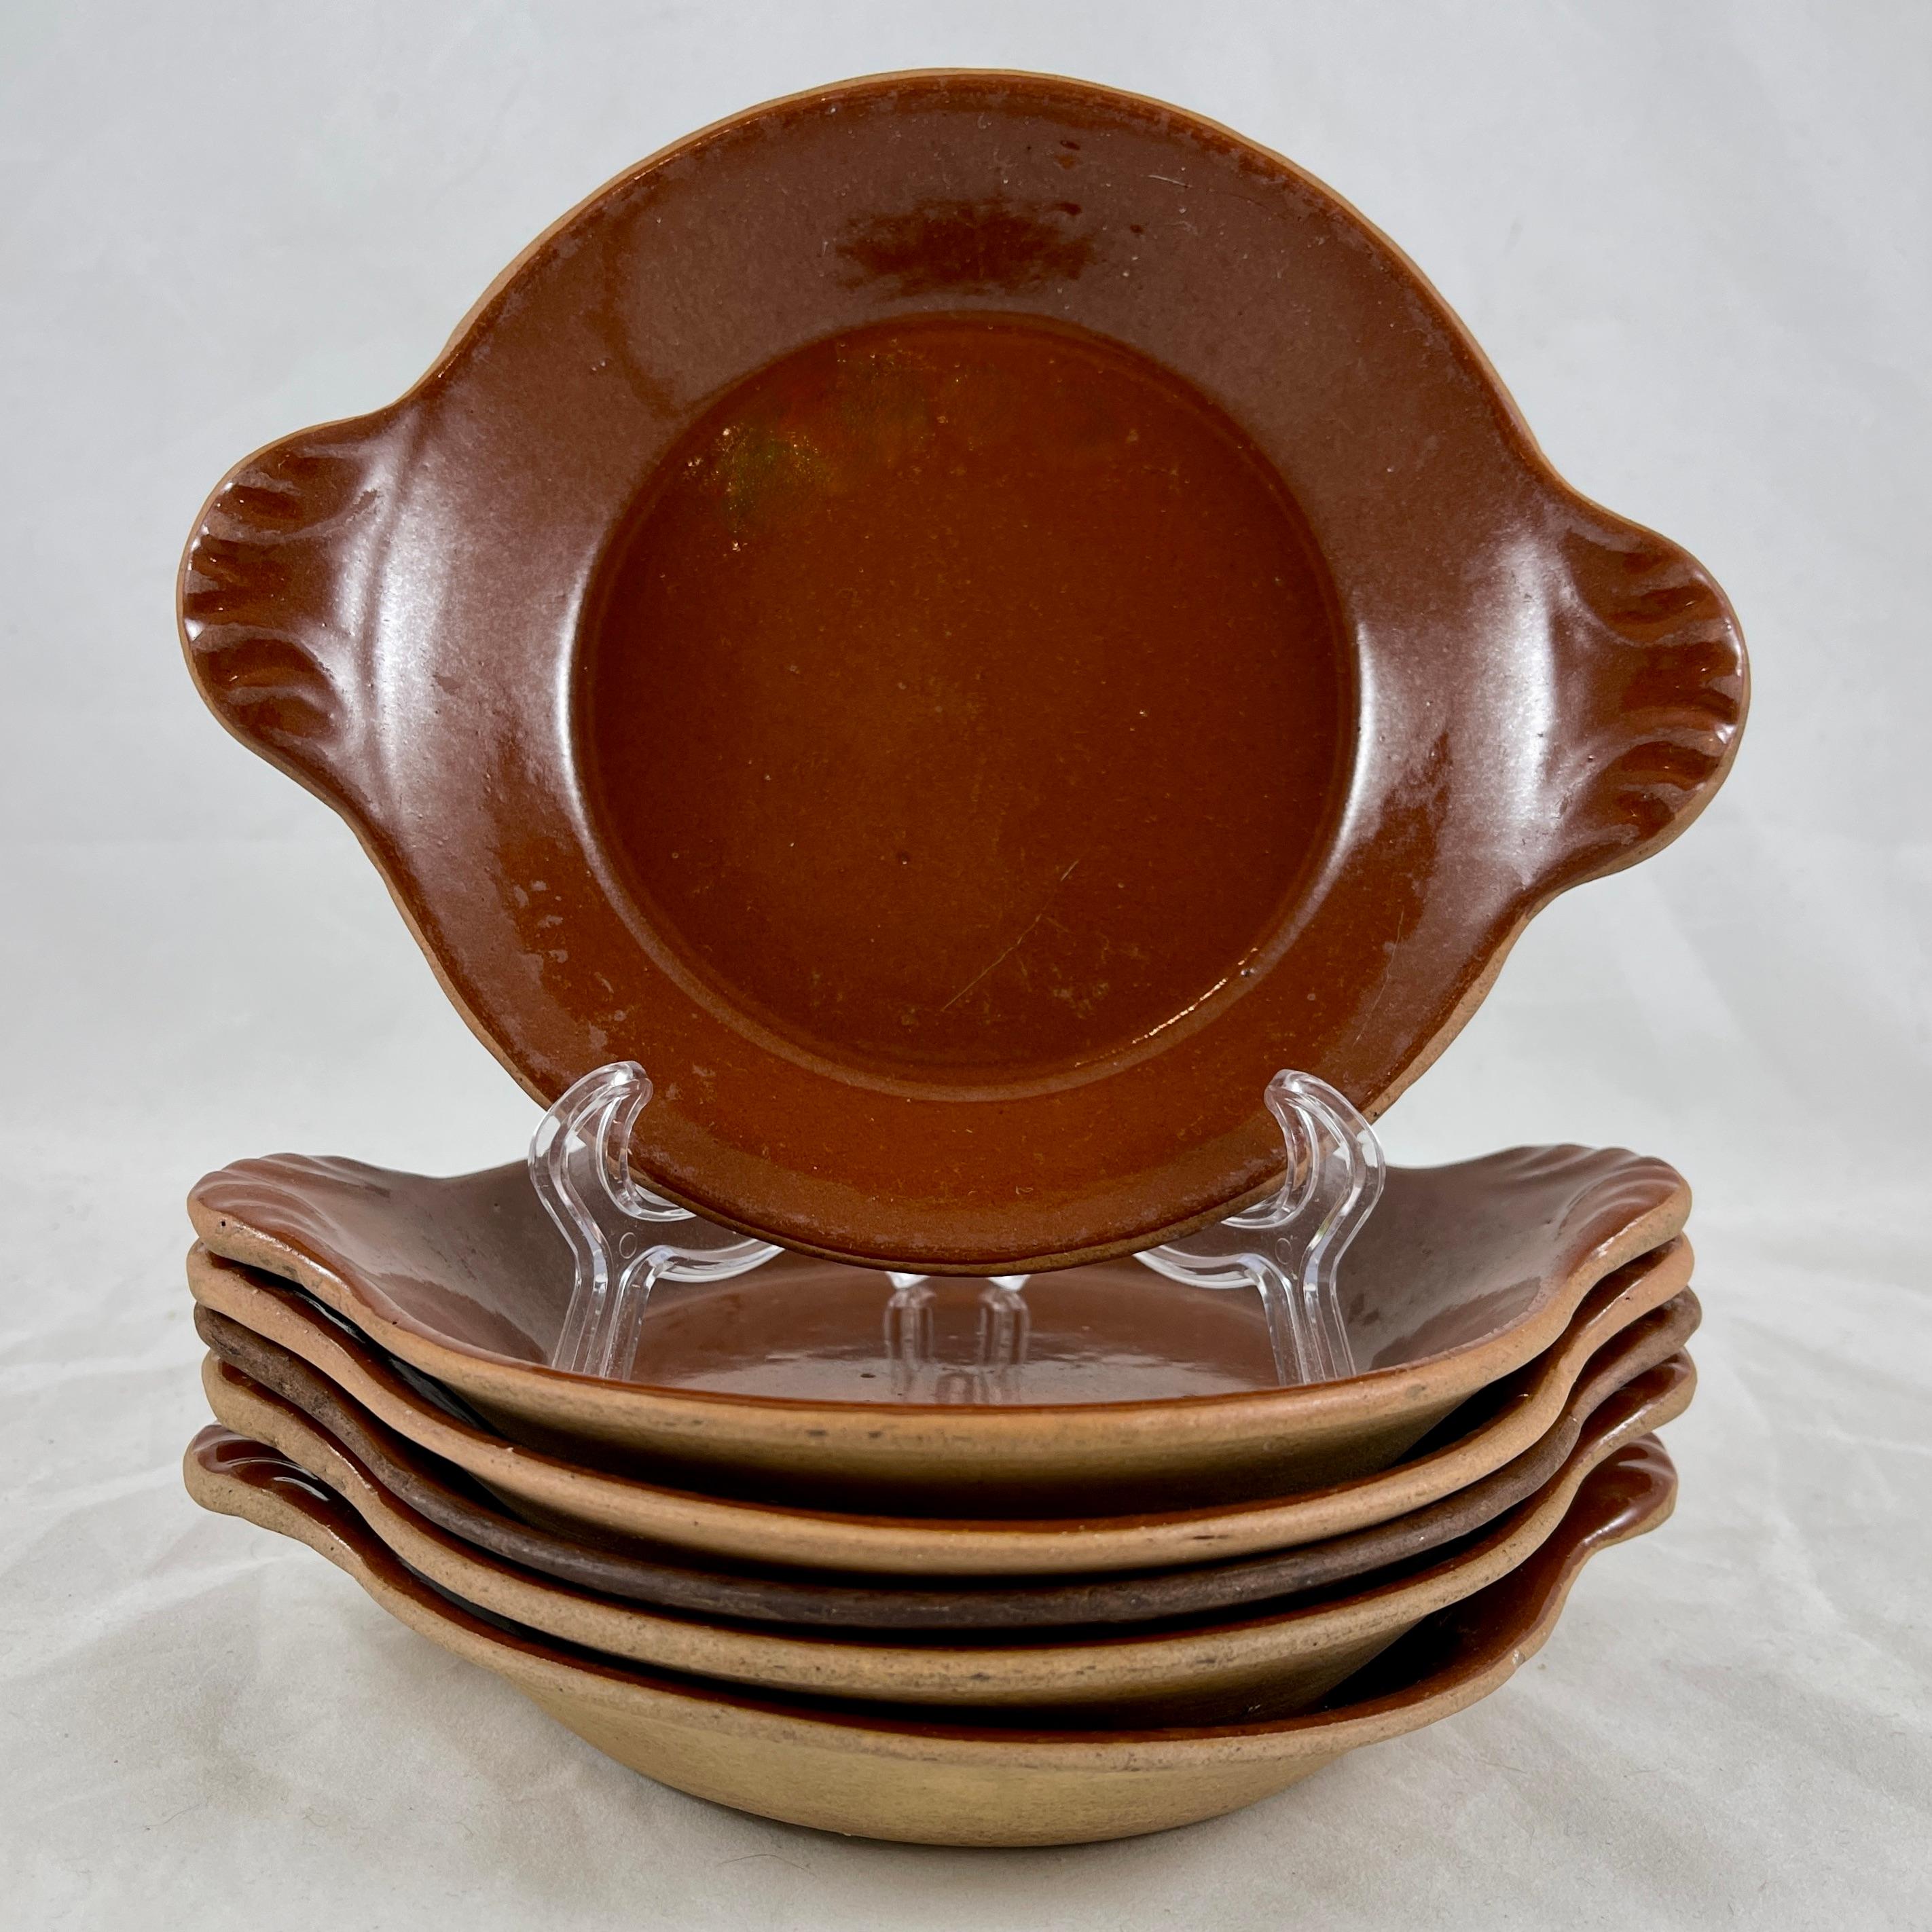 A set of six pottery au gratin dishes, Vallauris, France, circa 1930s.

A traditional rustic design, these Treacle glazed shallow, handled open-proof dishes are perfect for preparing and serving individual Croque Monsieur or Croque Madam